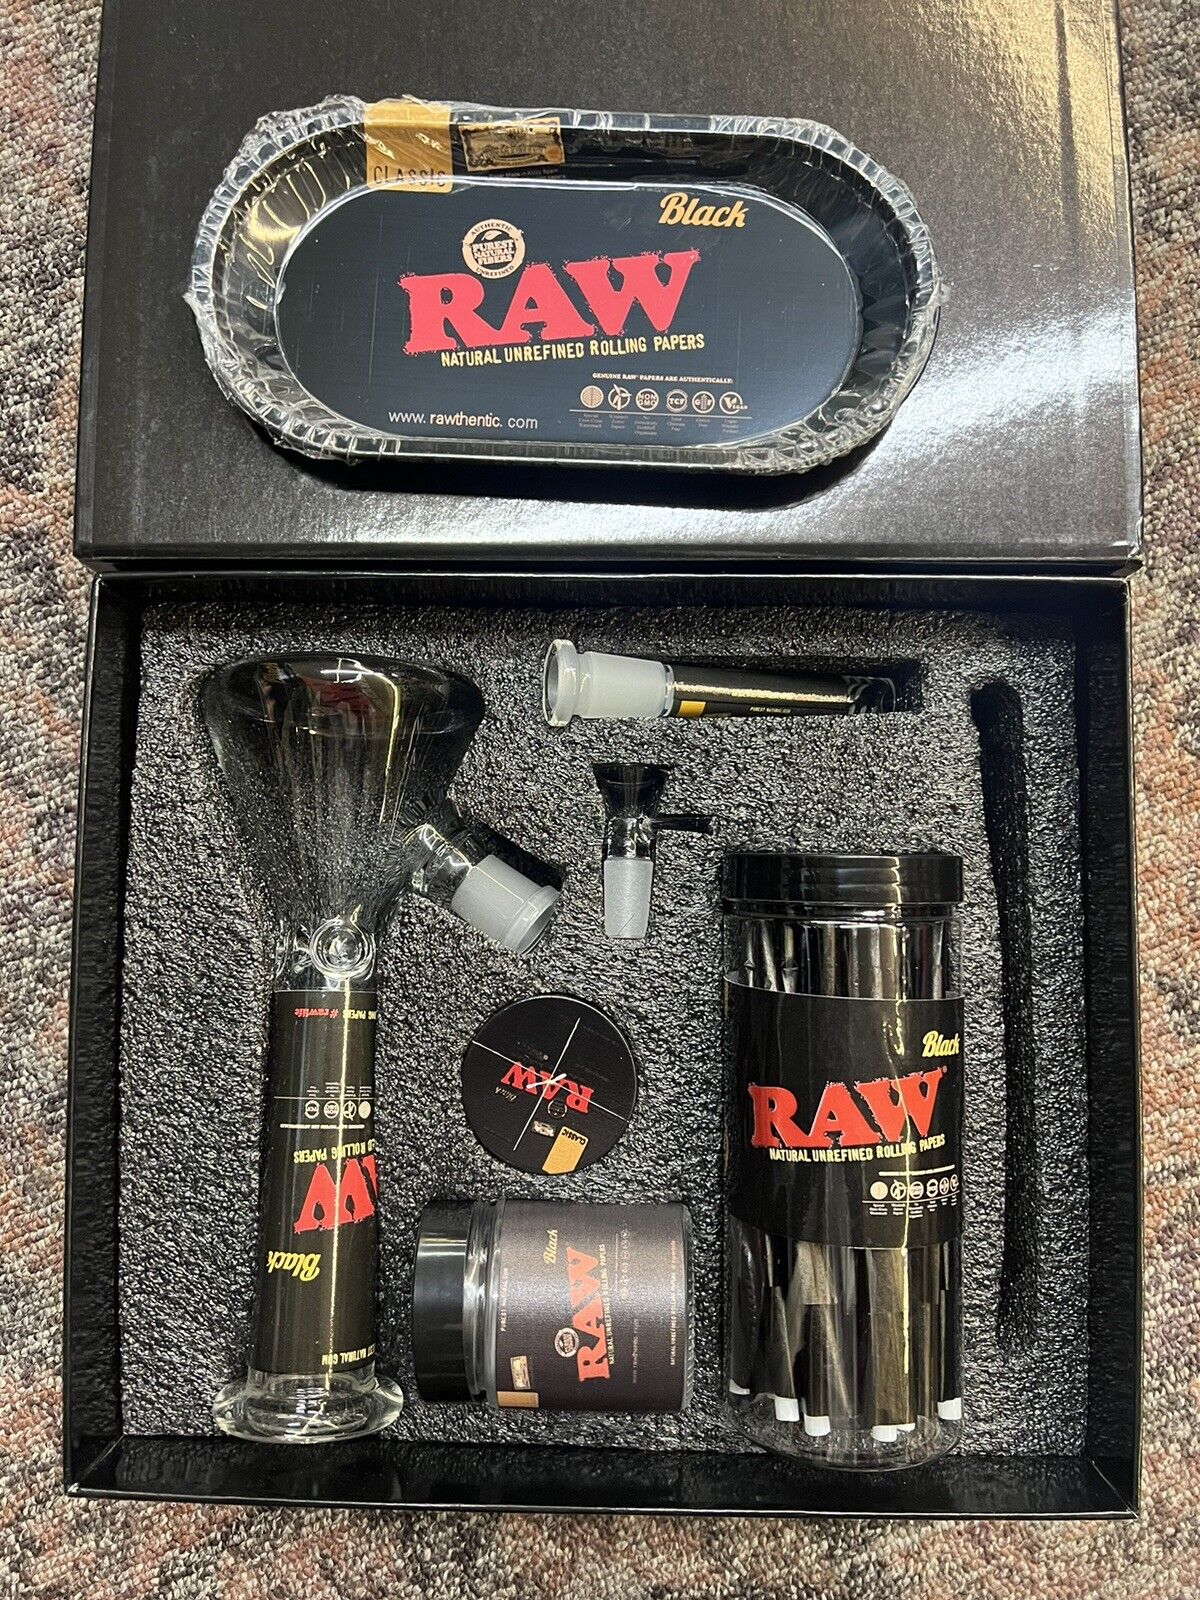 Raw Large Glass Bubbler Bong Gift Set With grinder, jar, tray, Raw Cones. New